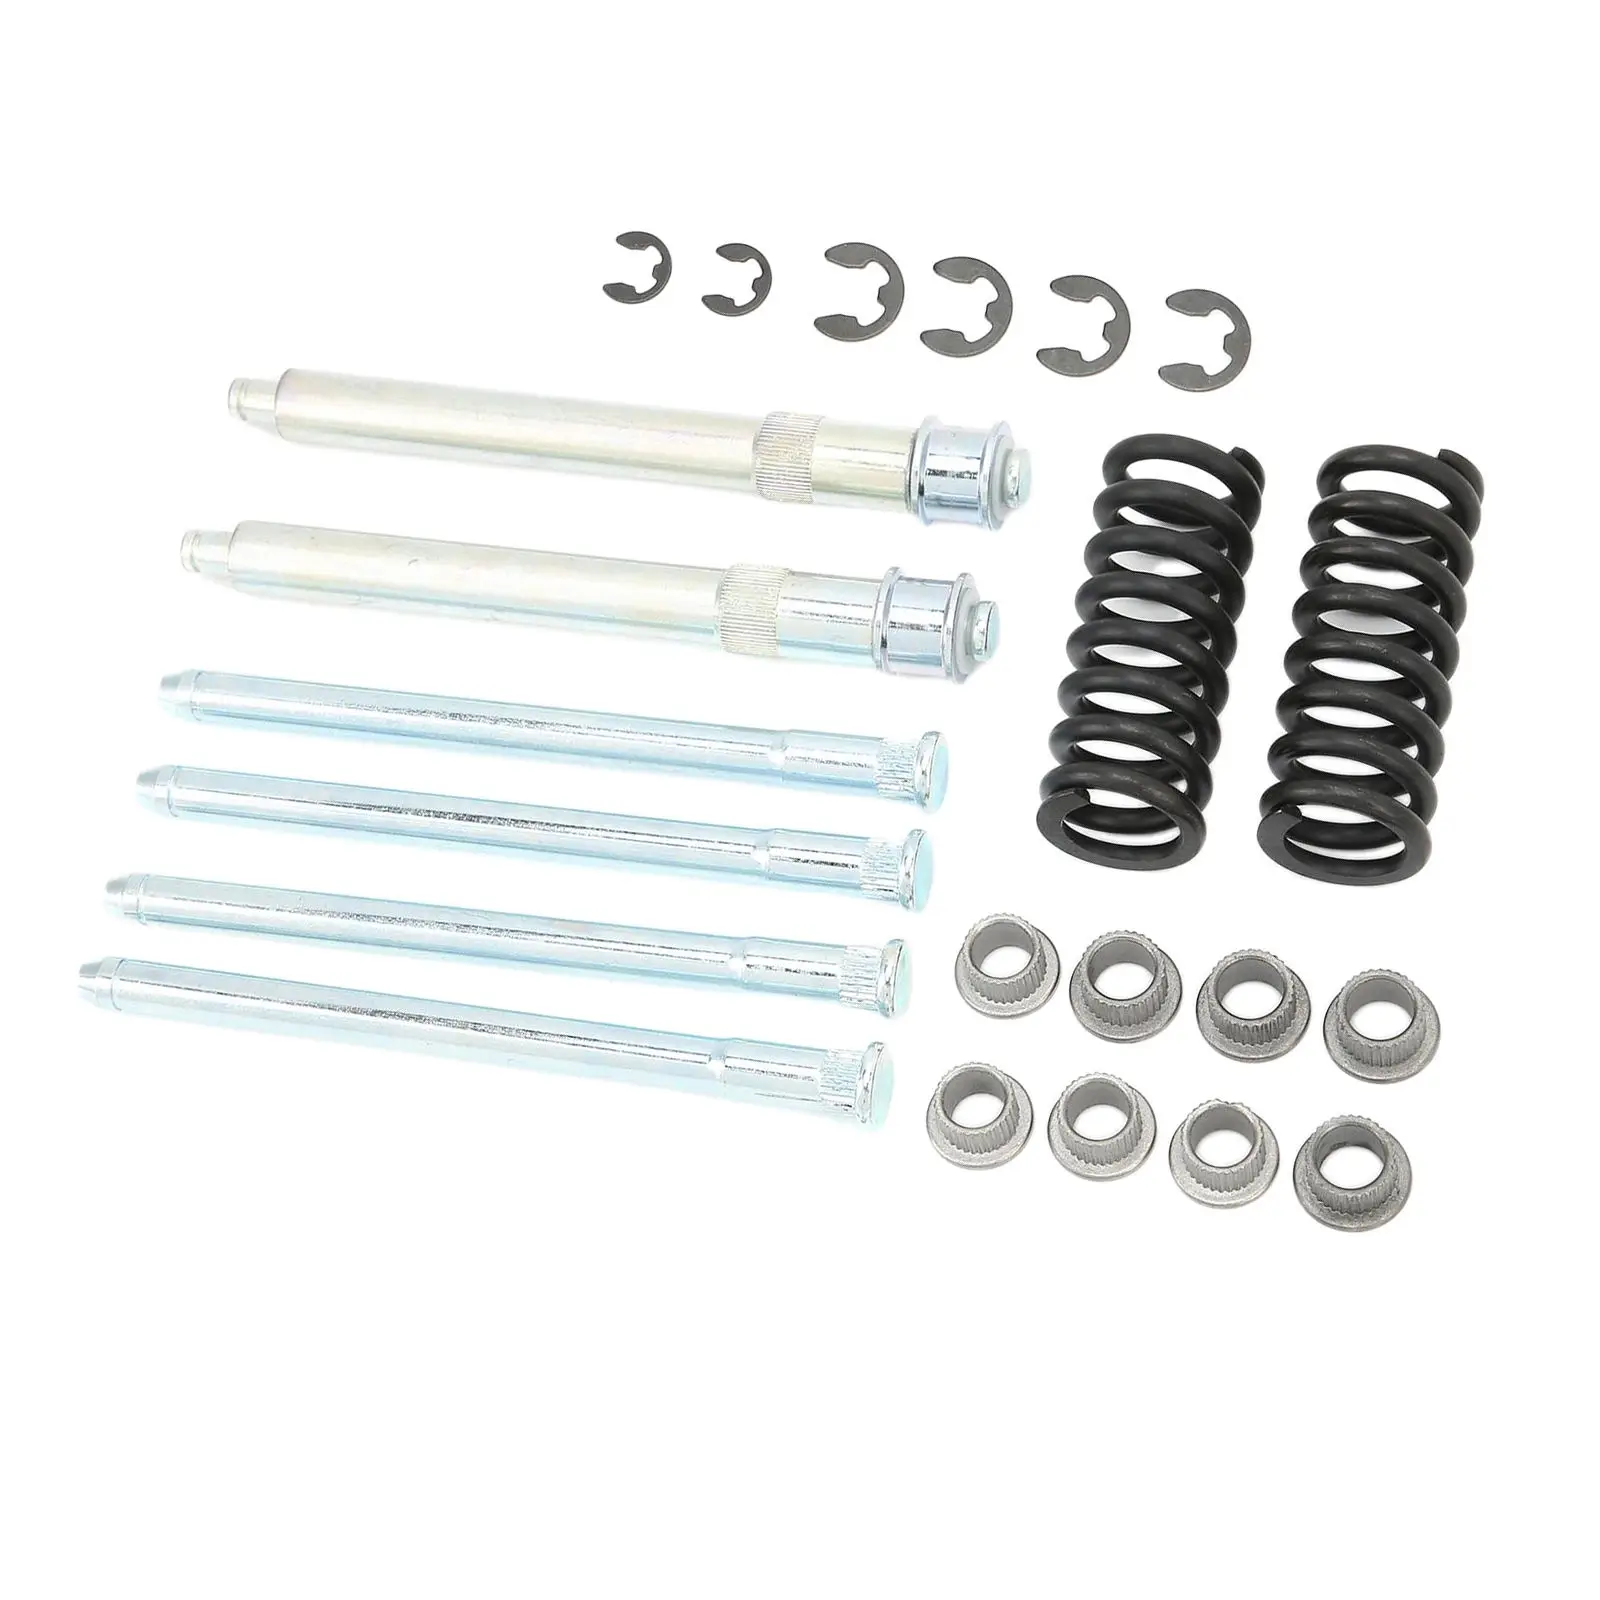 1 Set Door Hinge Pin and Spring with Bushing Kit, for Chevy GMC SUV, Easy to Install, Durable Metal, Vehicle Car Parts